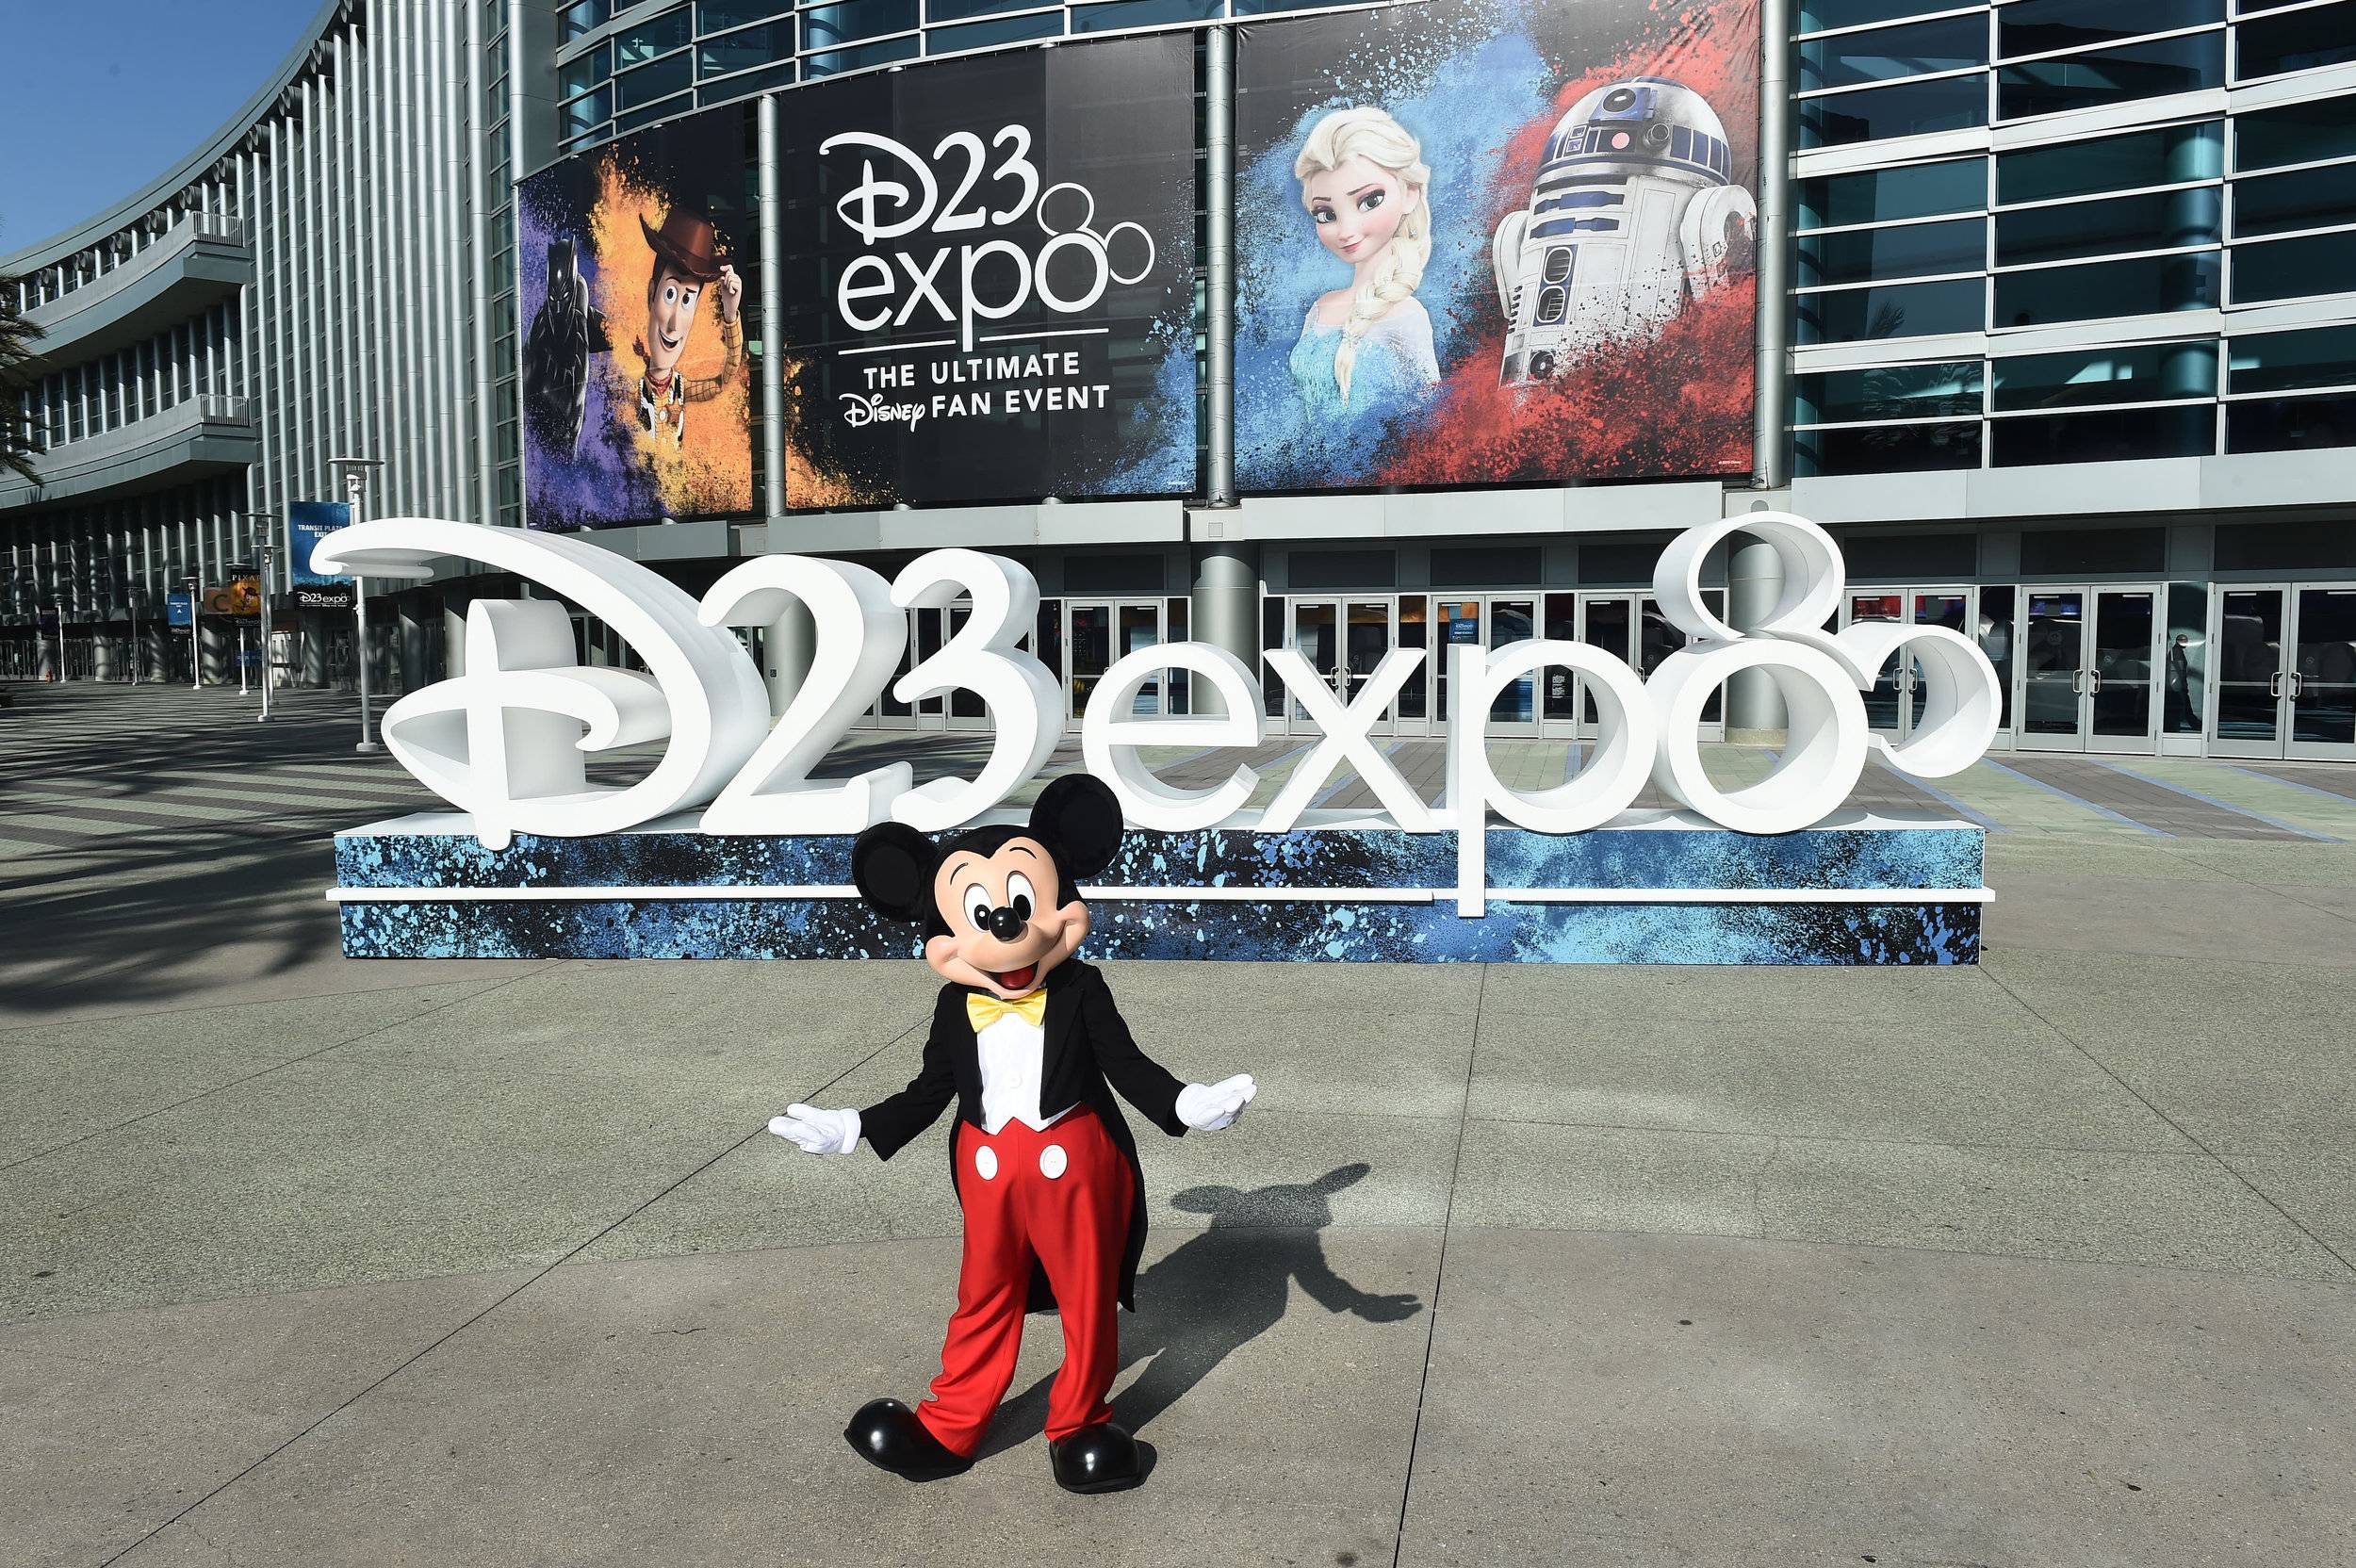 Live streaming schedule for this weekend's Destination D23 event from Walt Disney World